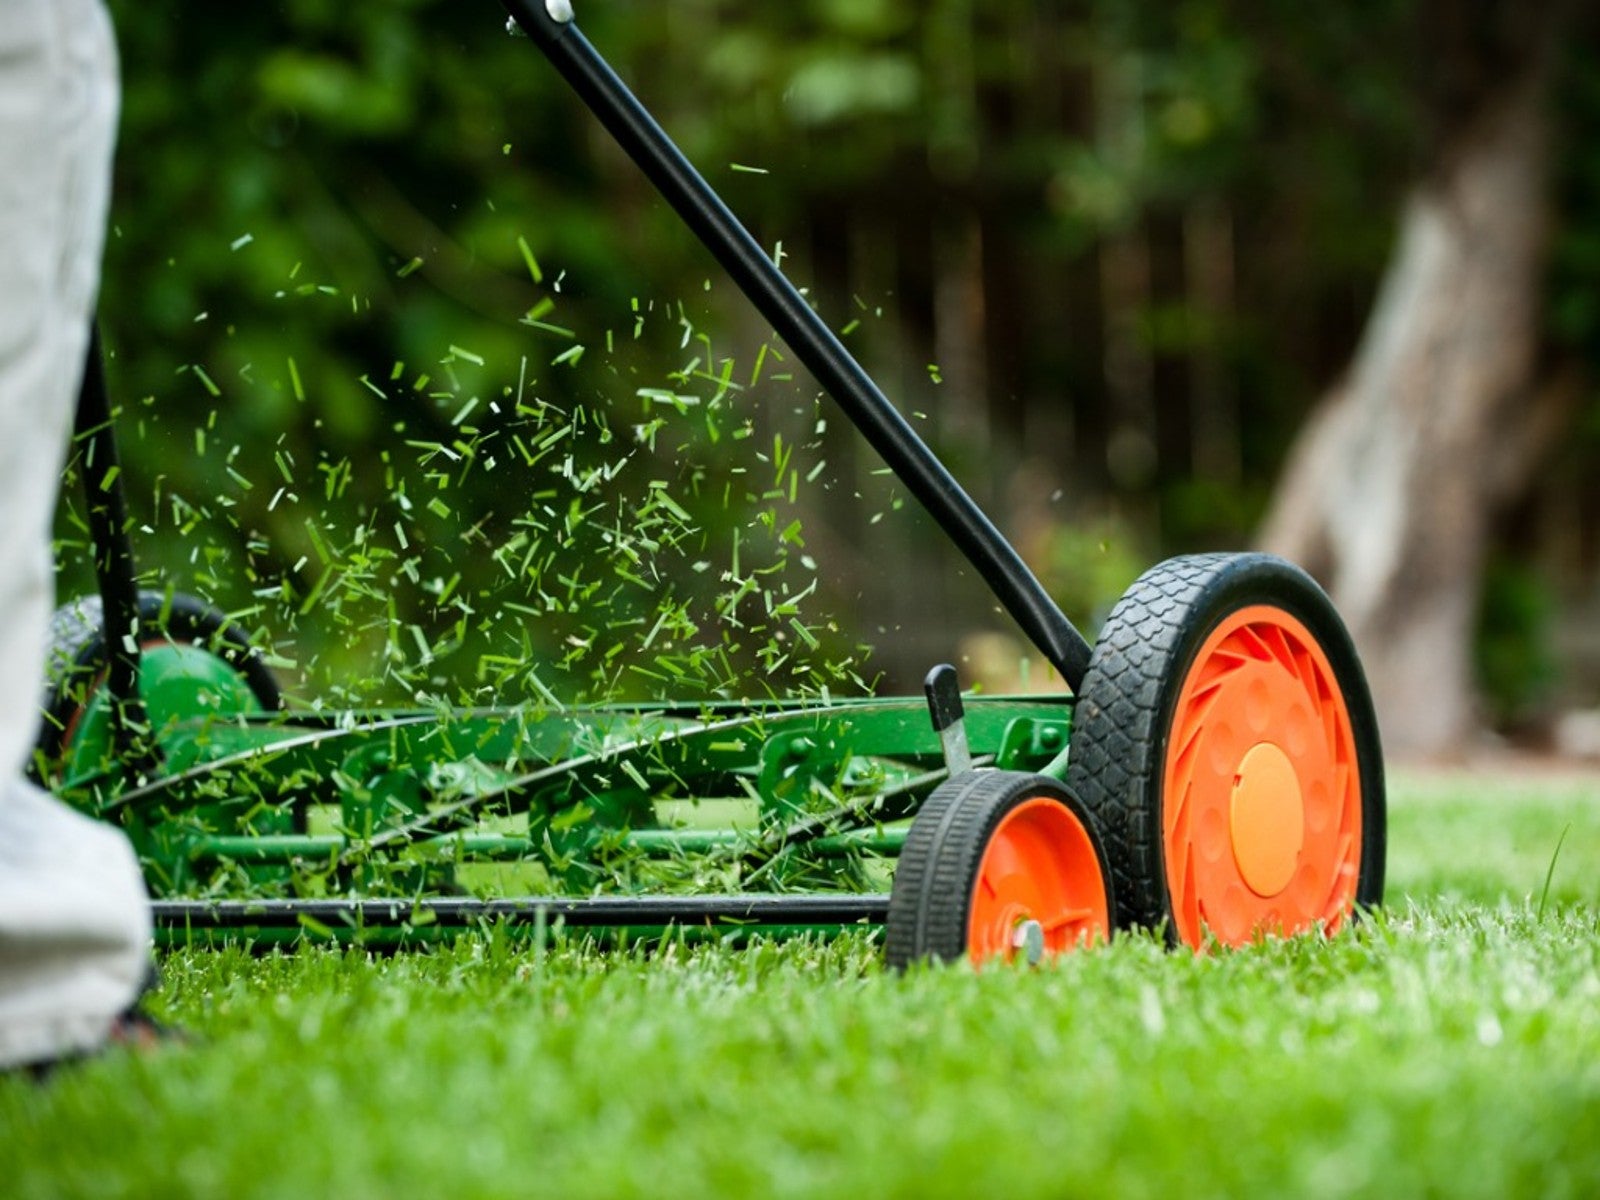 A green push mower with orange wheels moves along a lawn and shoots up cut blades of grass